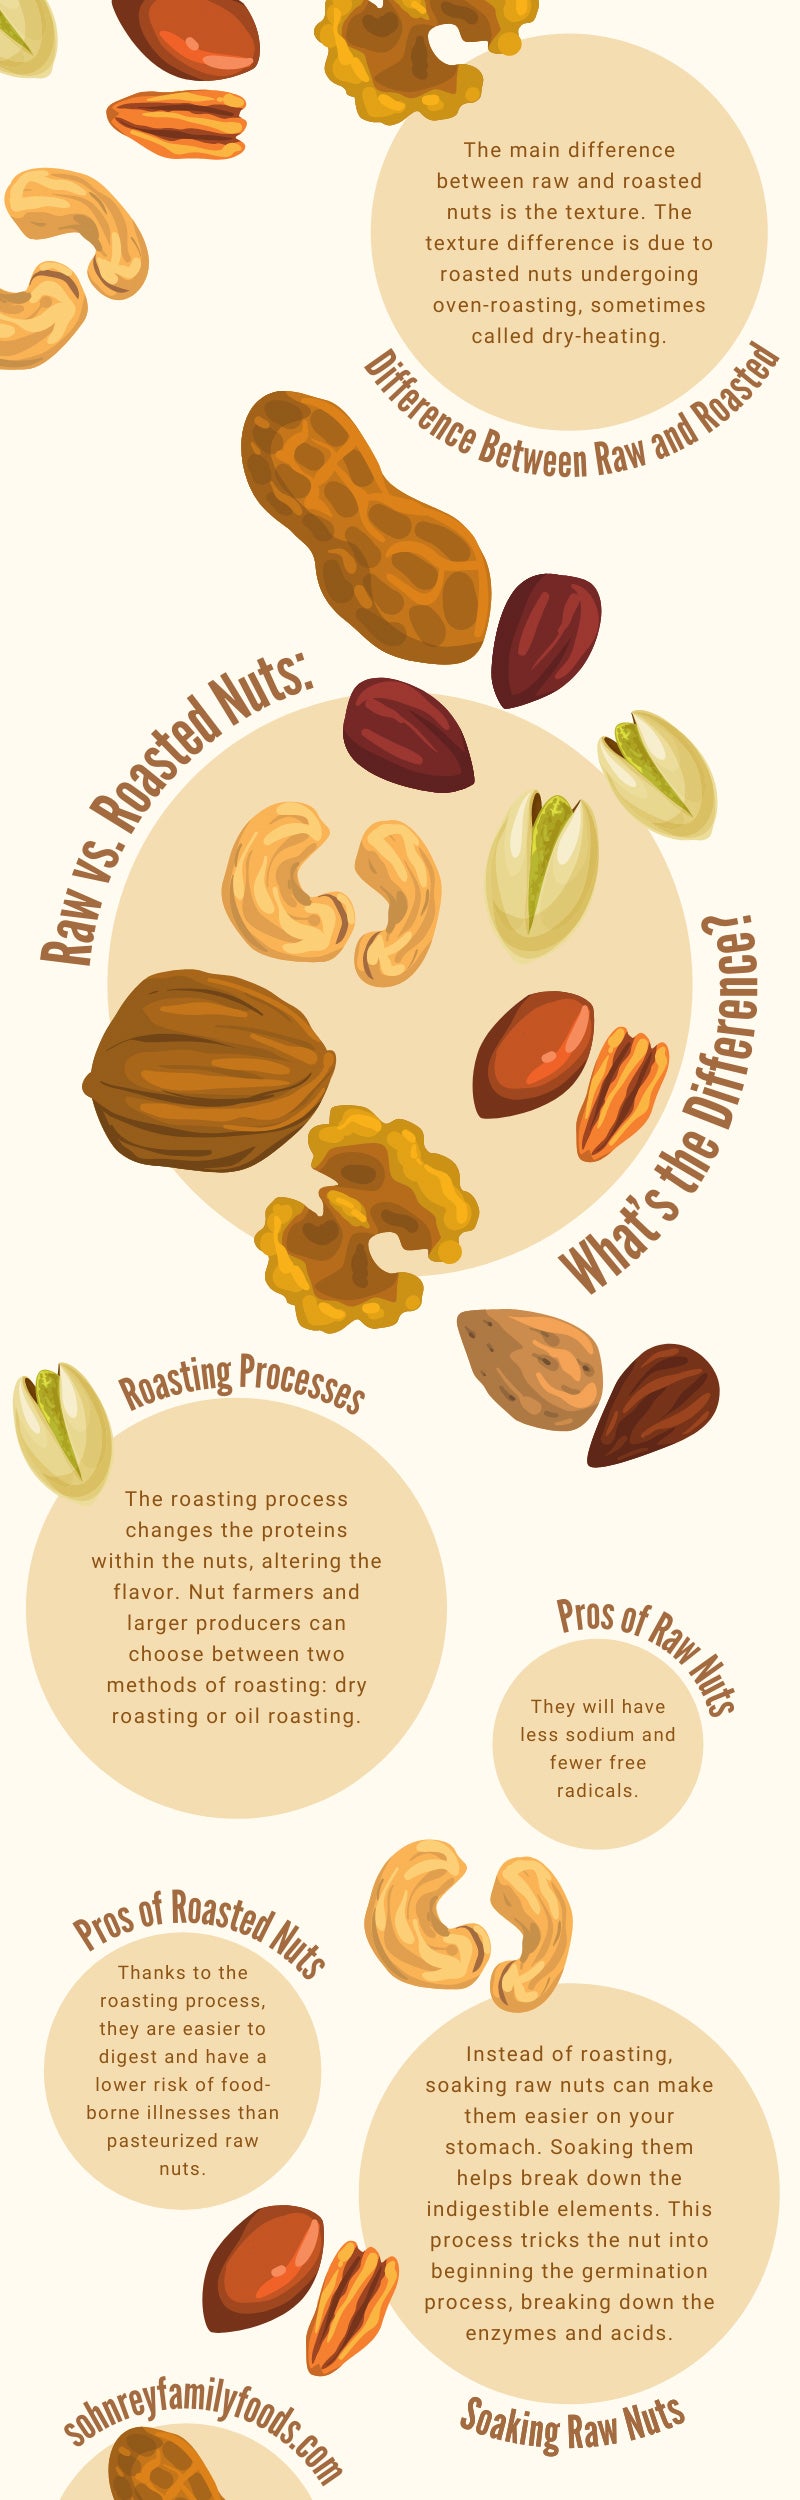 Raw vs. Roasted Nuts: What’s the Difference?